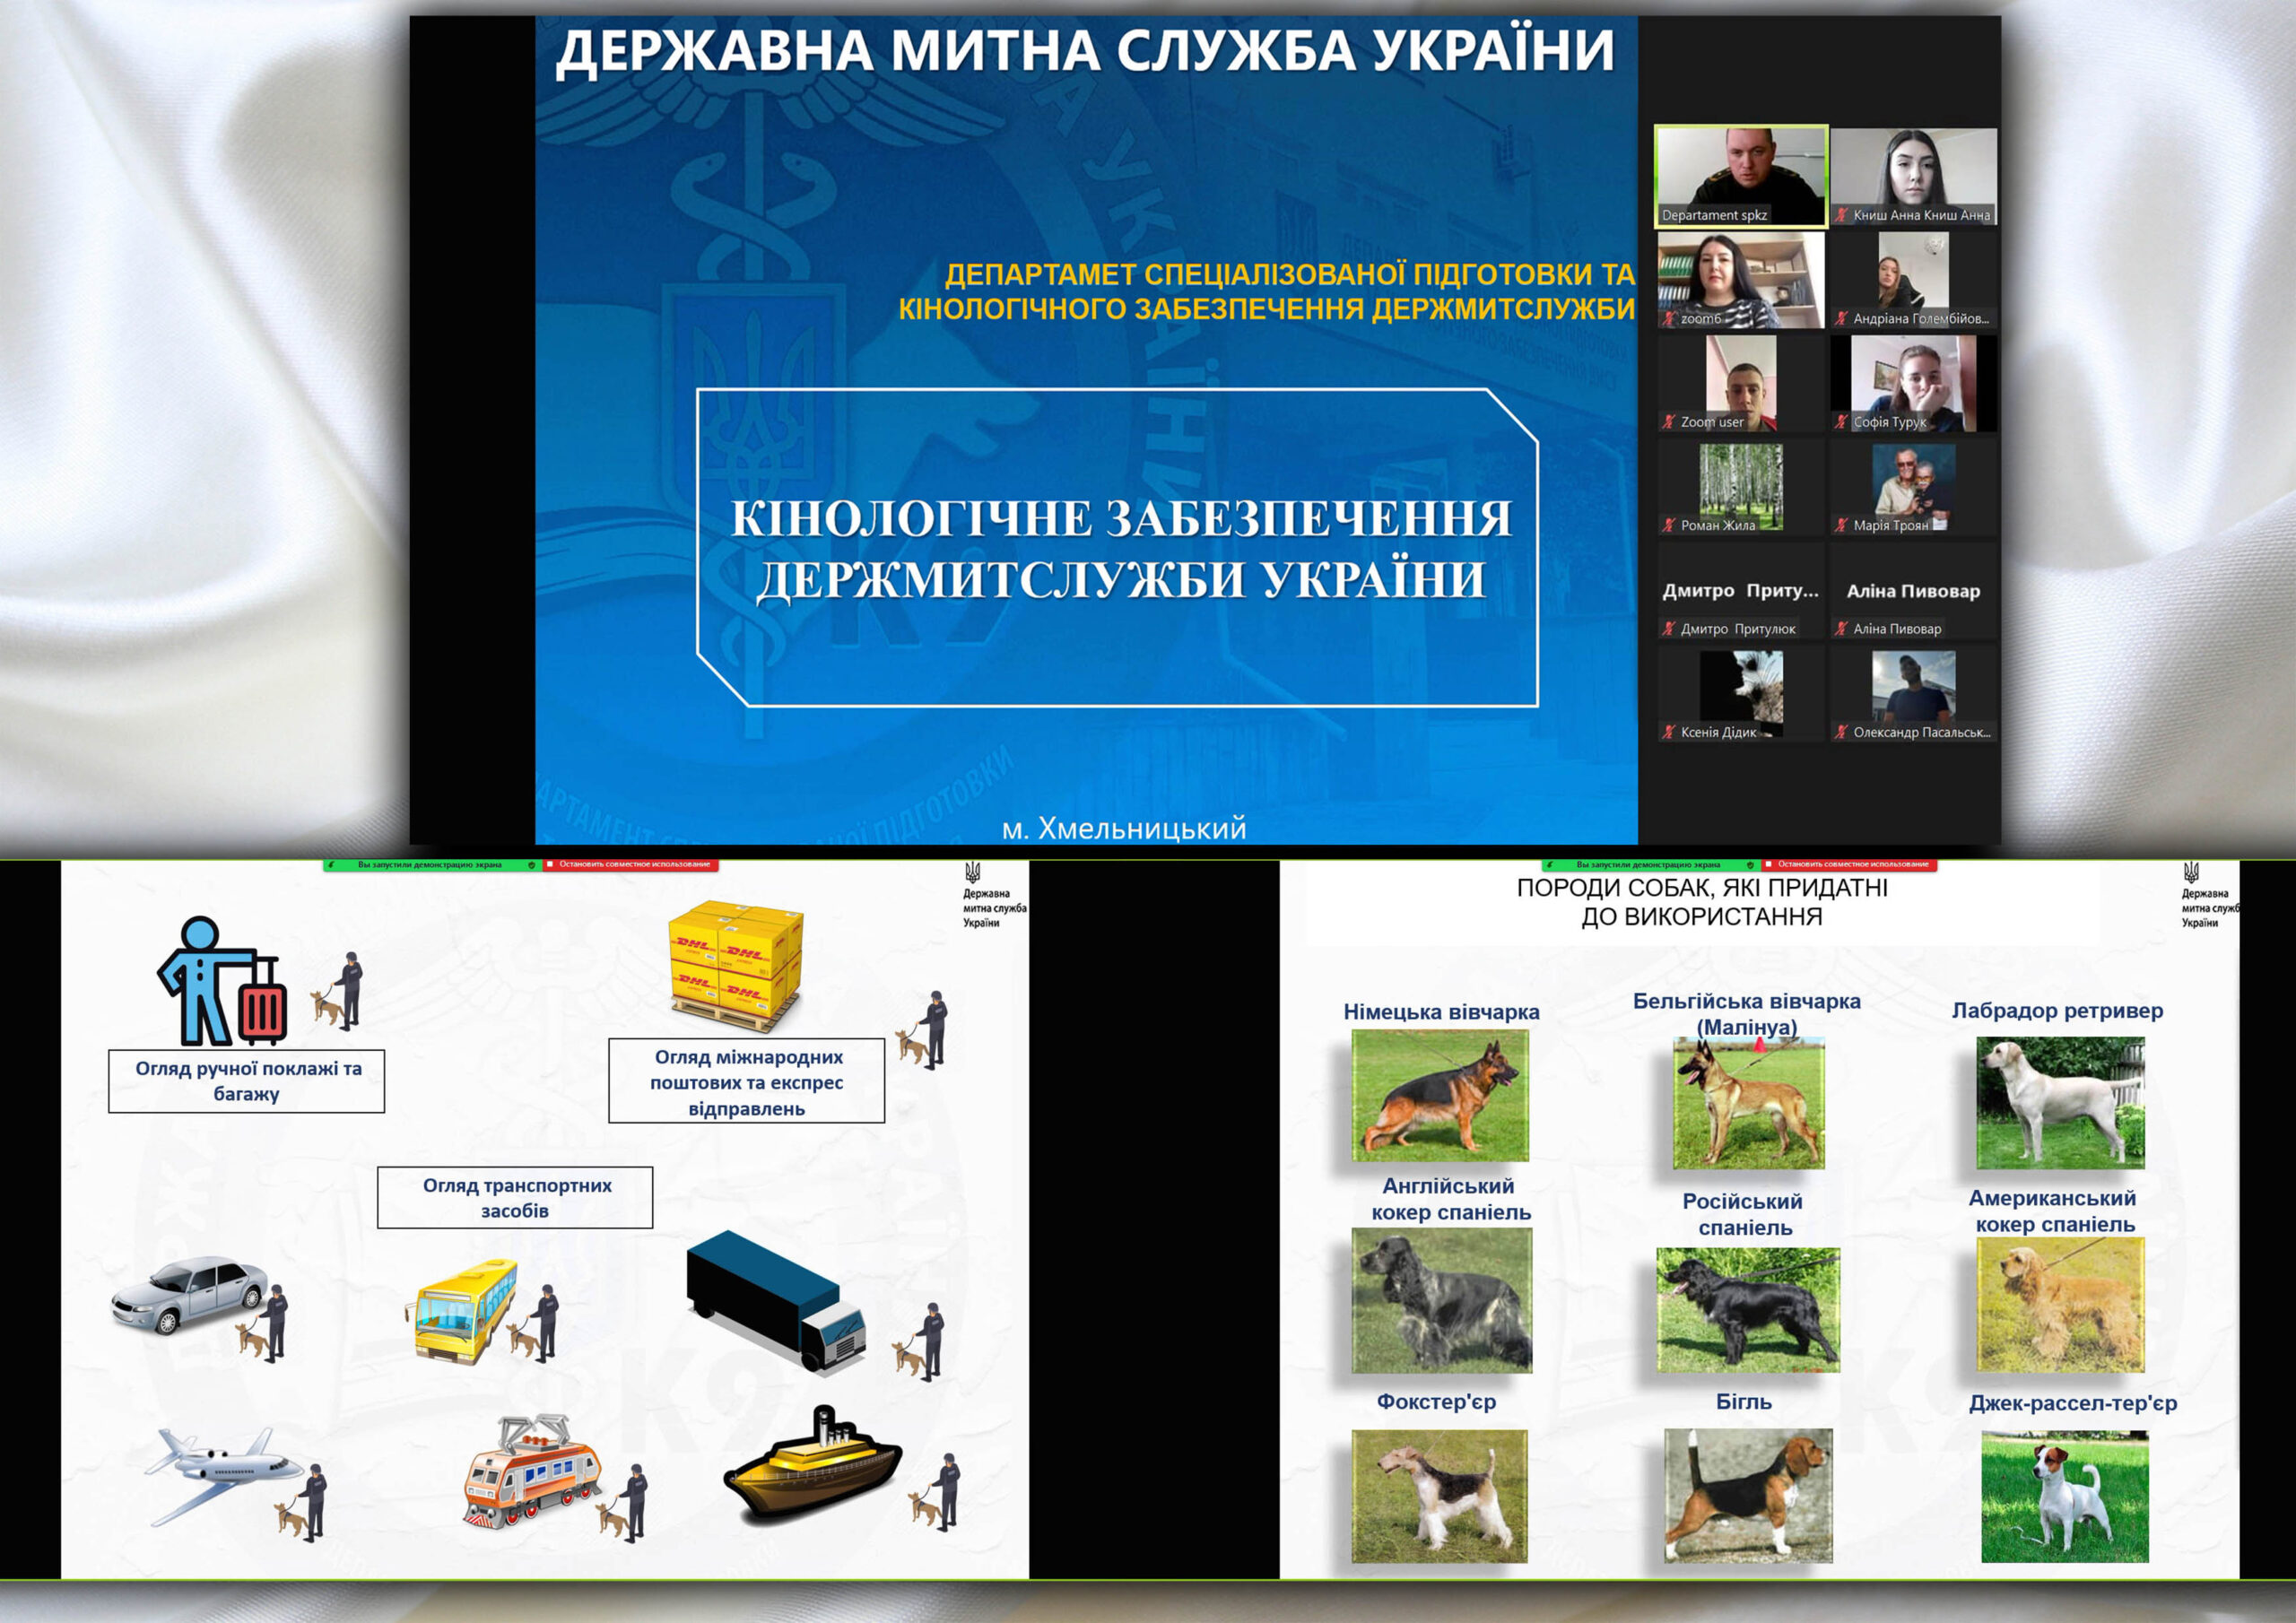 You are currently viewing Cooperation with the Western Ukrainian National University